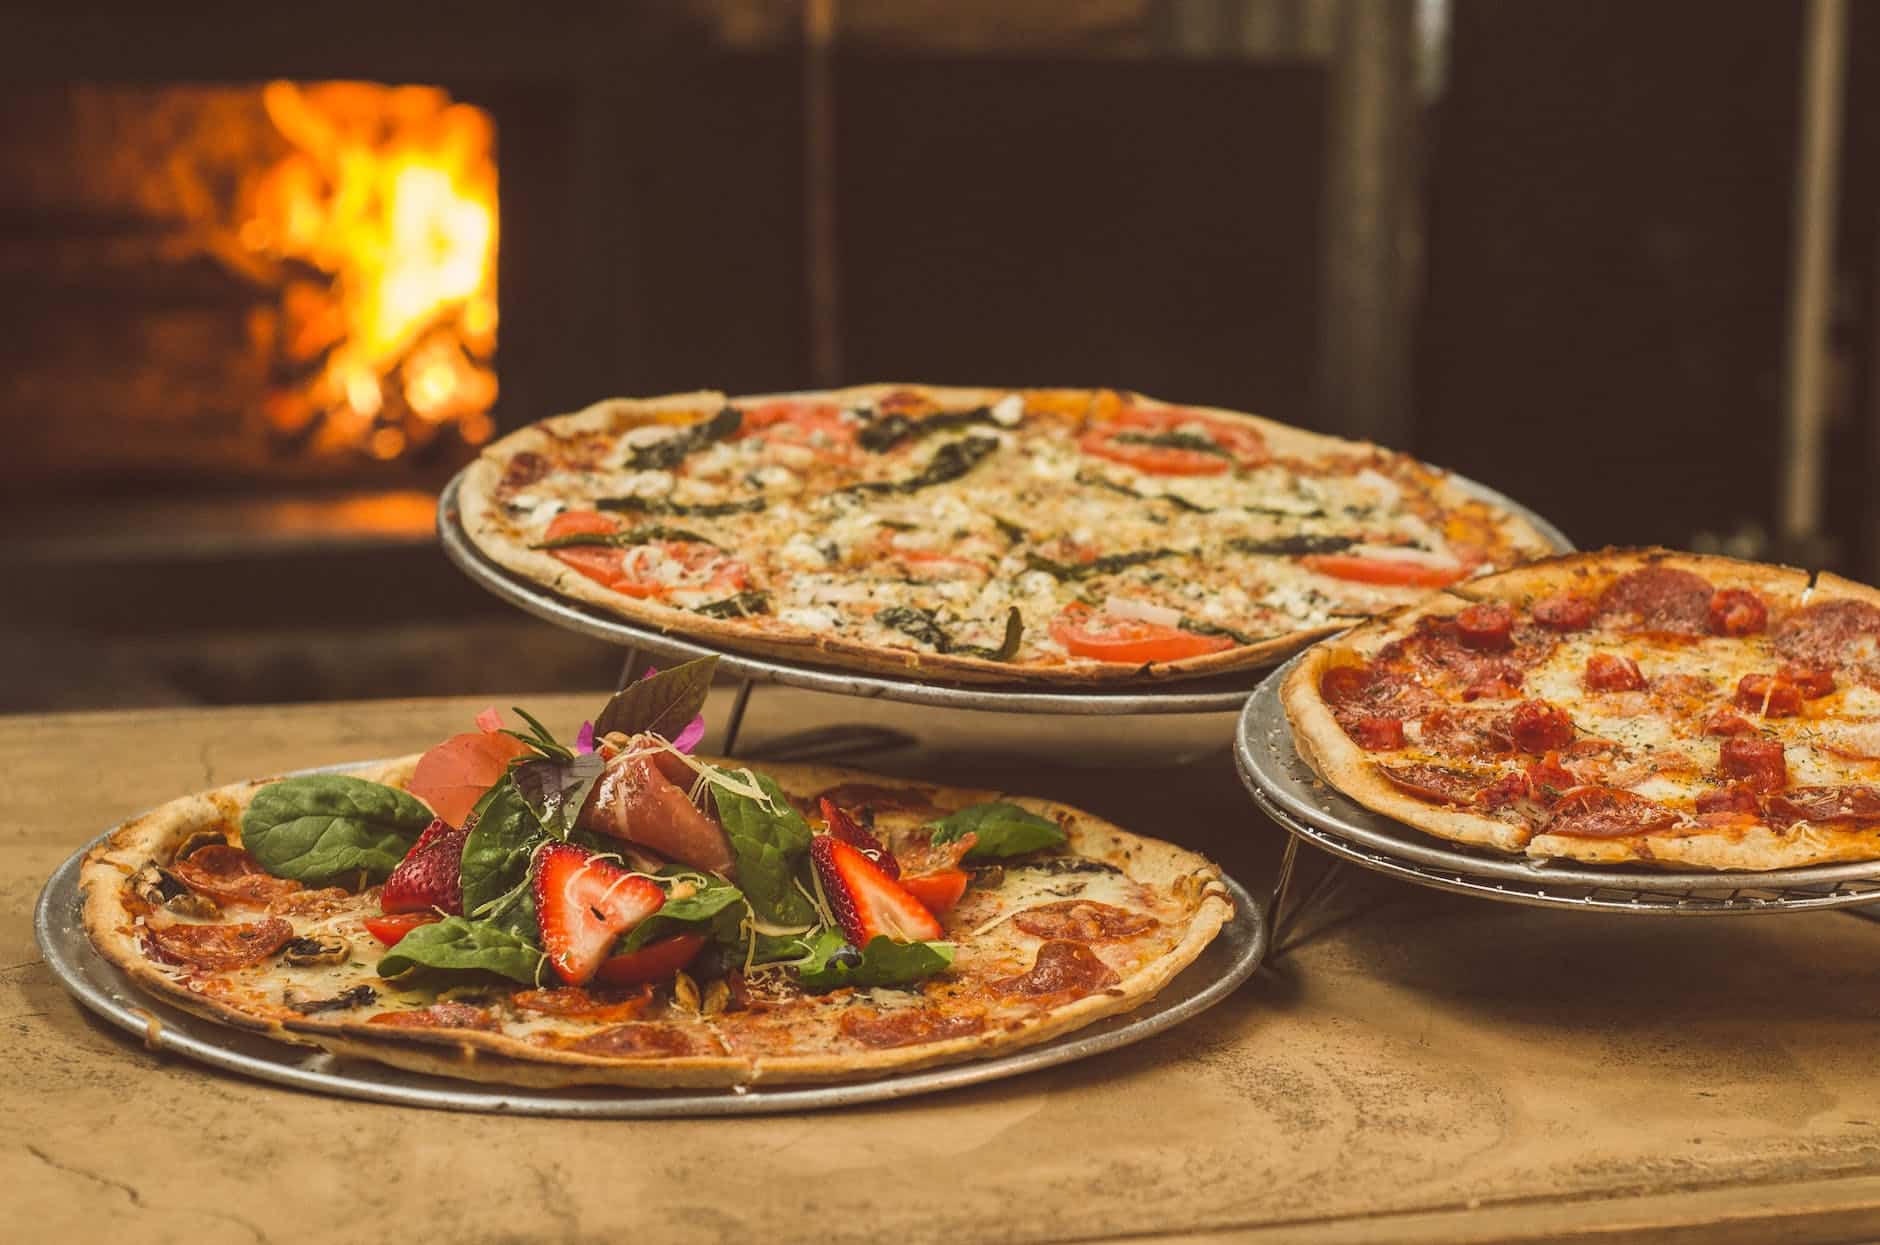 How To Increase Pizza Business Sales Using Data Analytics?